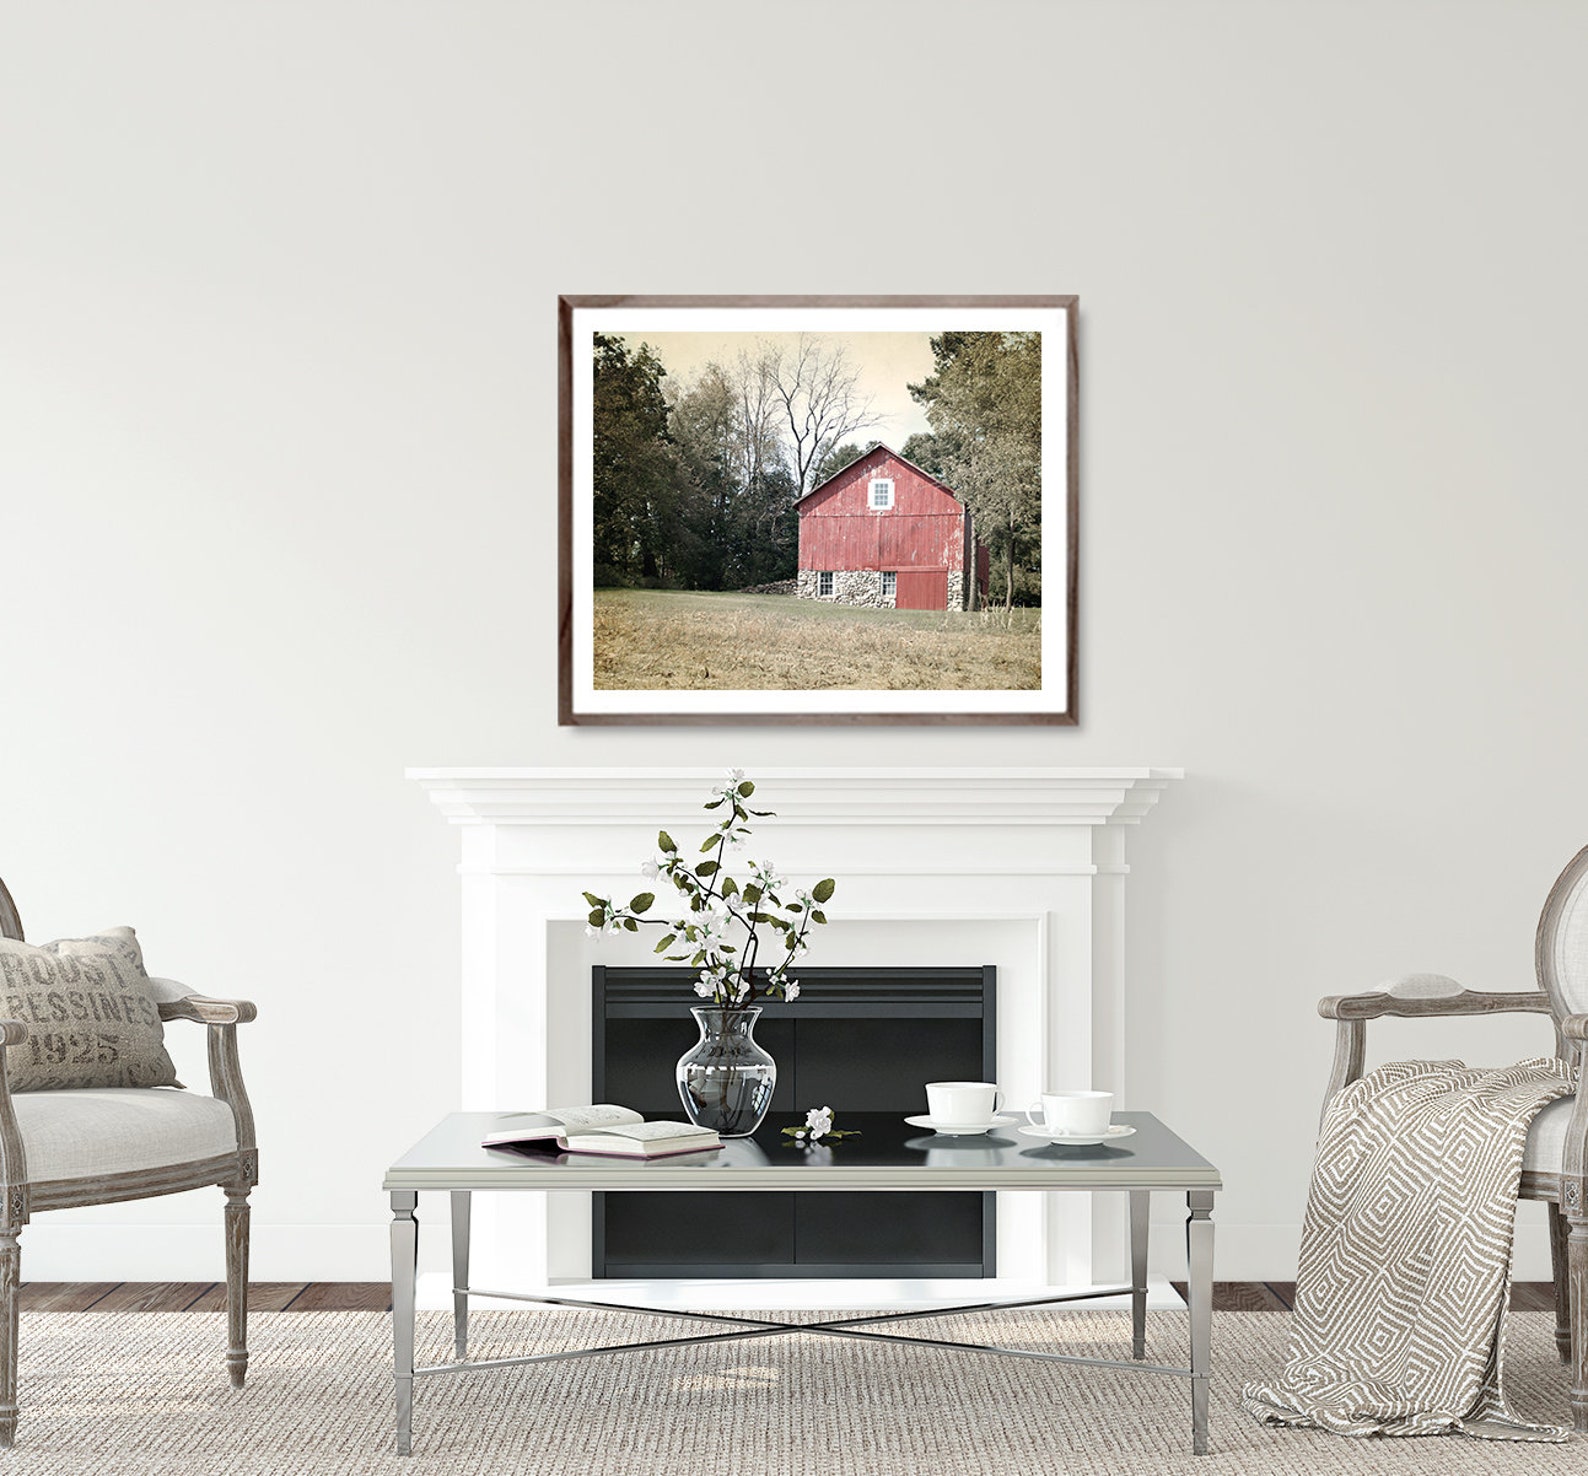 Red Barn picture rustic wall decor rustic barn print | Etsy